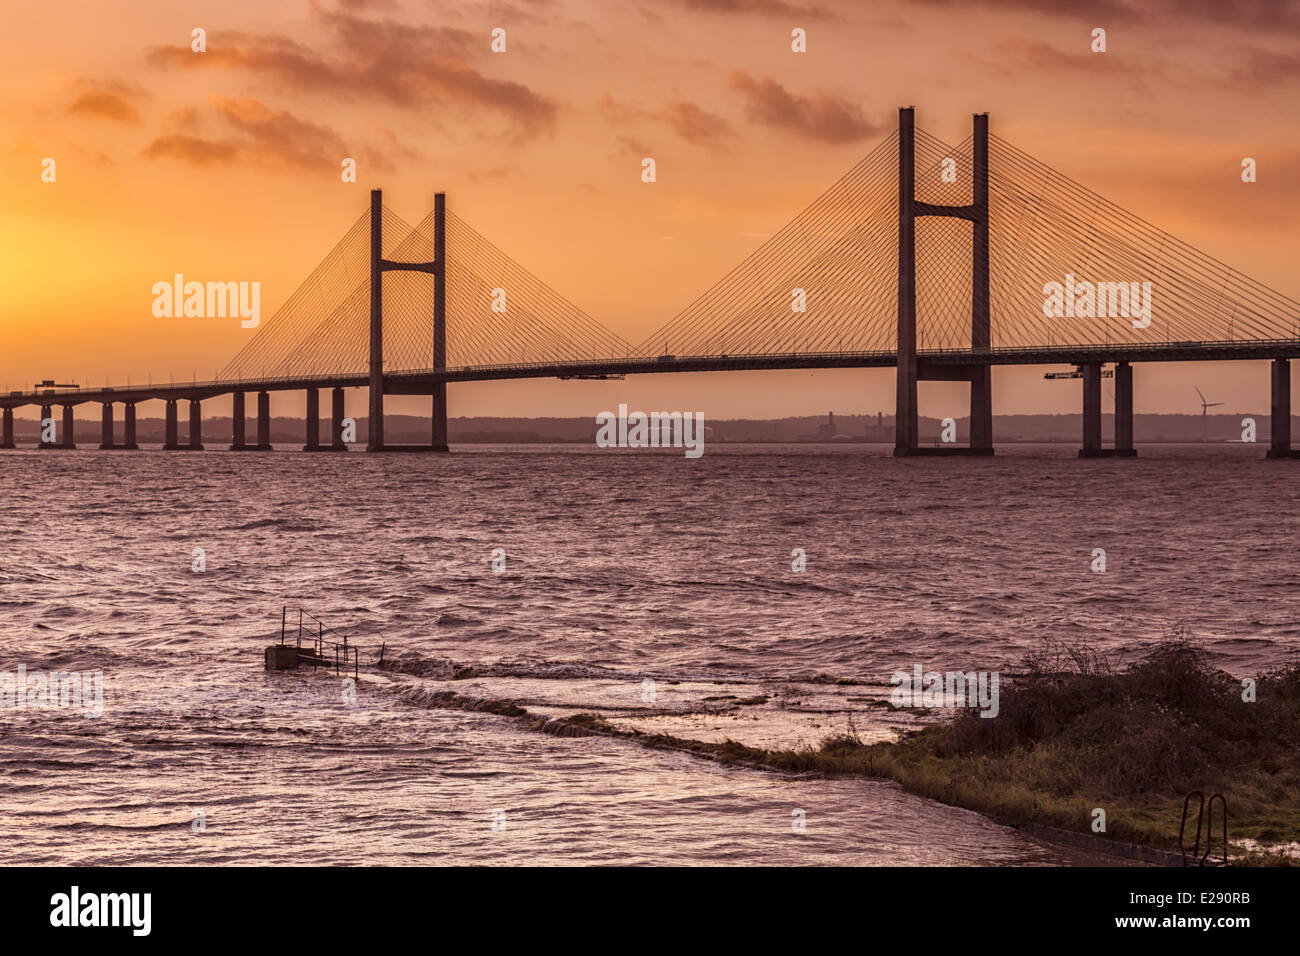 View of jetty, harbour wall and road bridge during very high tide and stormy conditions at sunrise, Sudbrook Jetty, Second Severn Crossing, River Severn, Severn Estuary, Monmouthshire, Wales, January Stock Photo